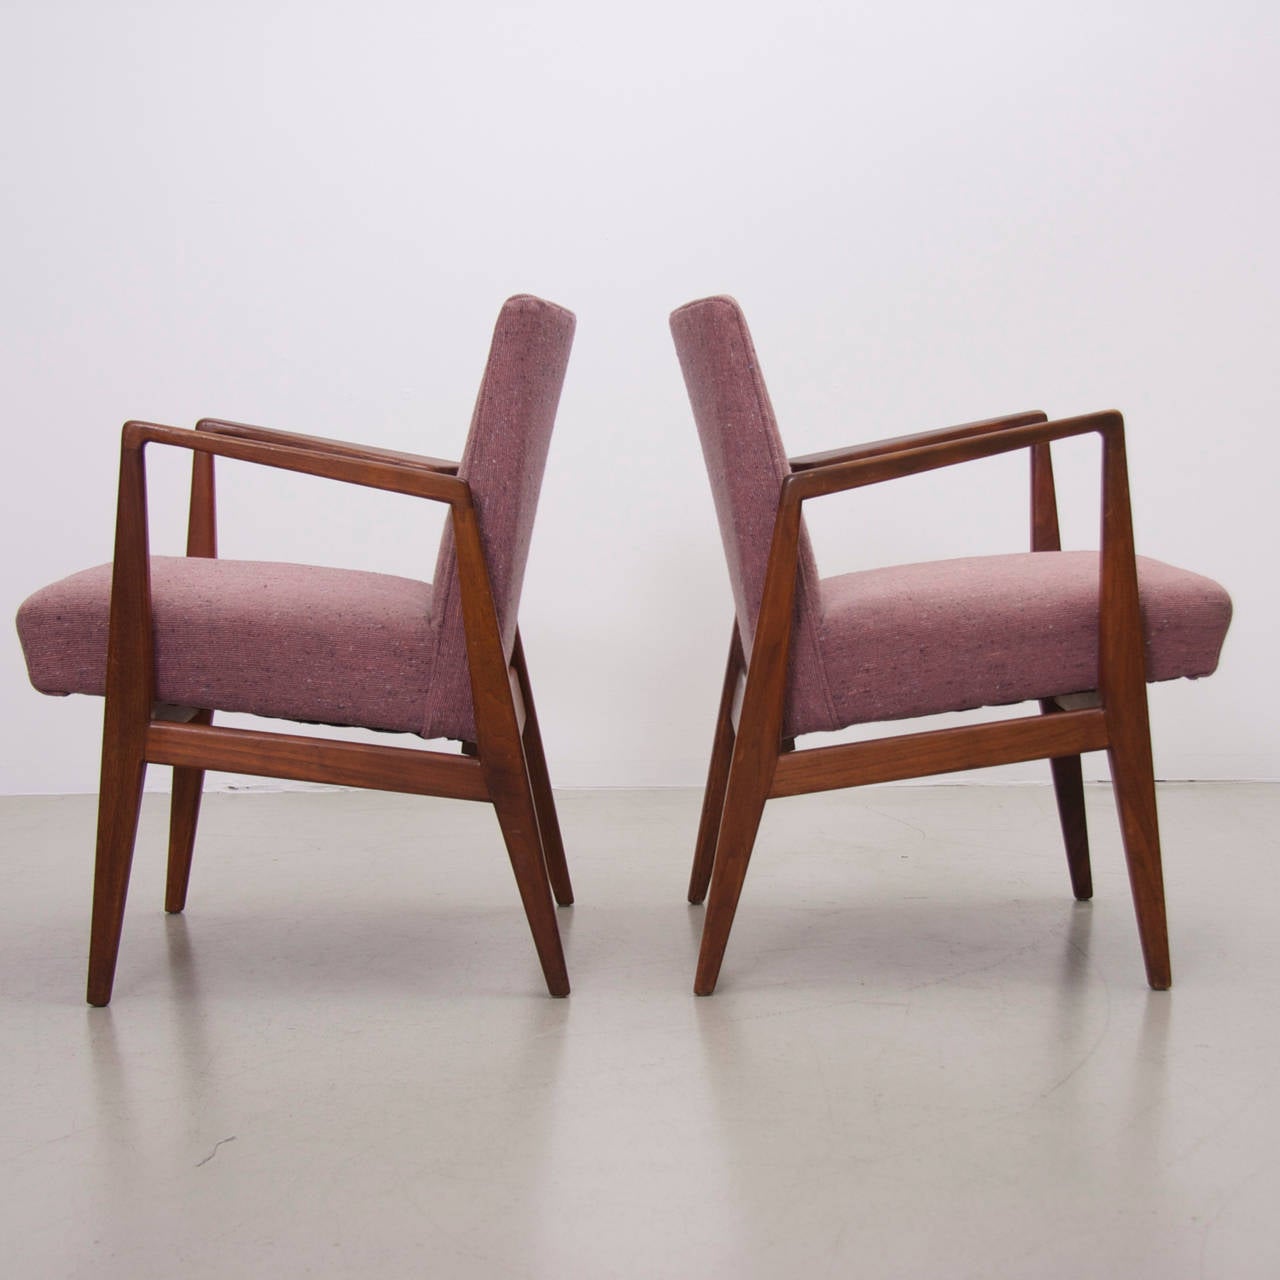 Very beautiful pair of Jens Risom Ocasional Chairs for Jens Risom Inc. in original pinkish wool fabric. Very elegant!! The solid walnut frame shows a great patina.